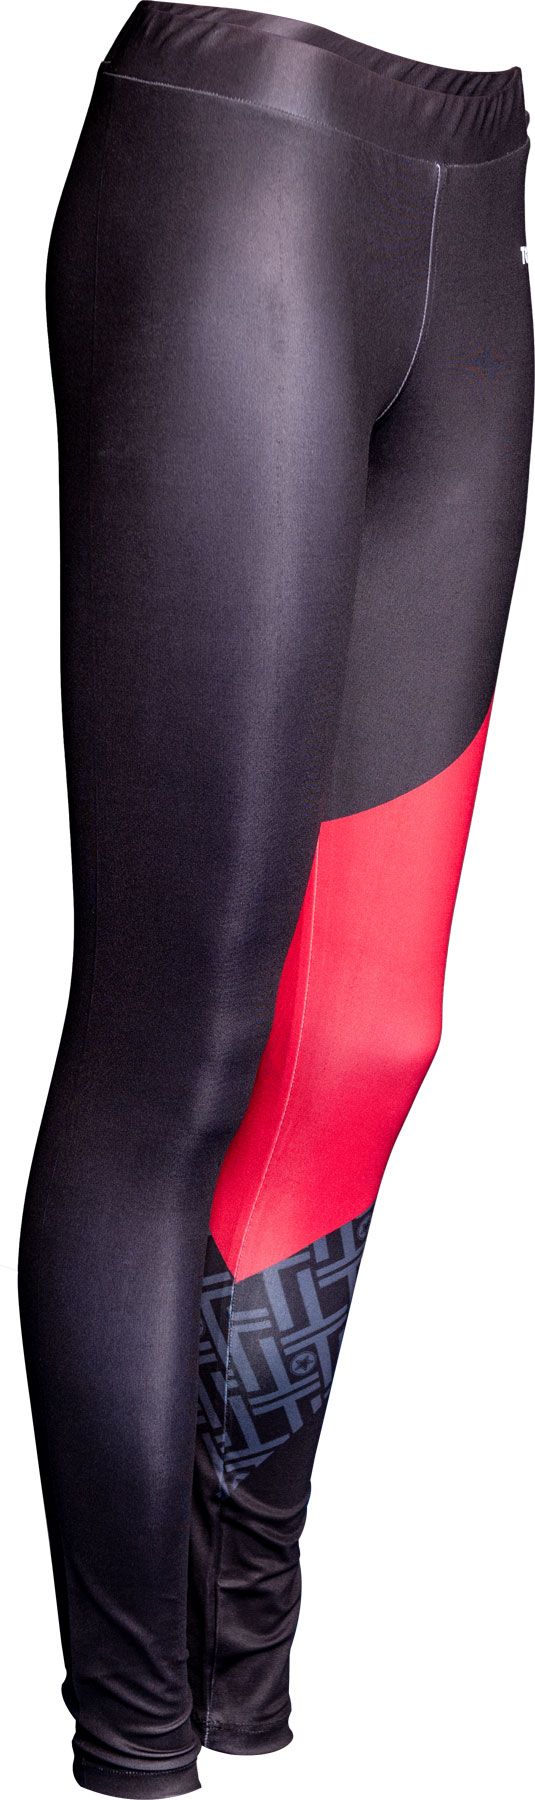 TopTen workout leggings ITF - ray